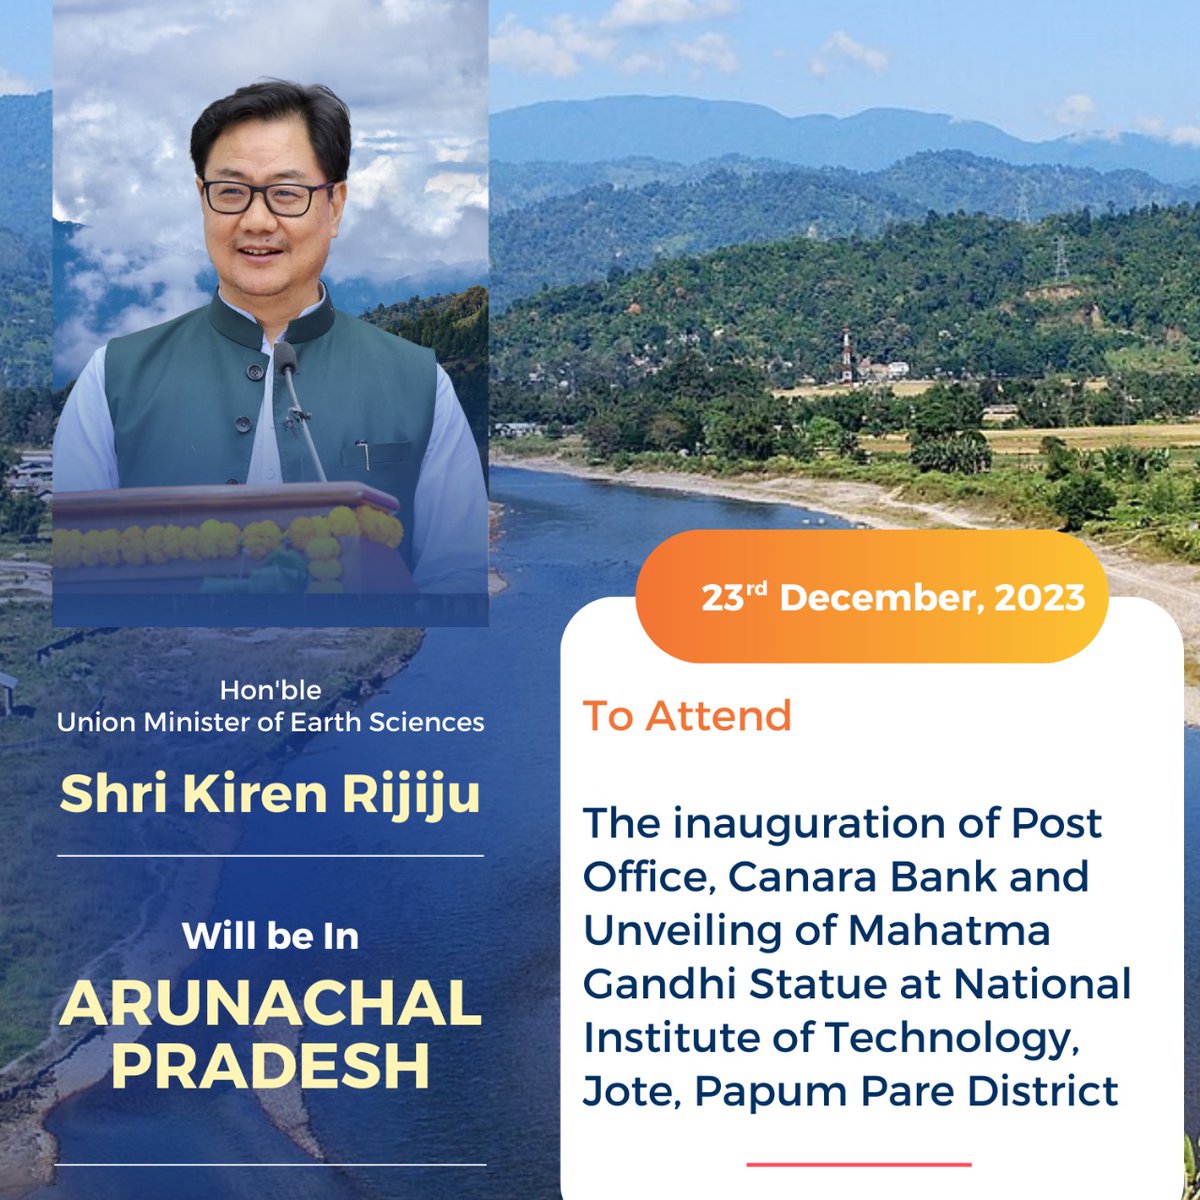 Hon'ble Union Minister of Earth Sciences Shri @KirenRijiju ji will be in Arunachal Pradesh to attend the inauguration of Post Office, Canara Bank and Unveiling of Mahatma Gandhi Statue at National Institute of Technology, Jote, Papum Pare District.